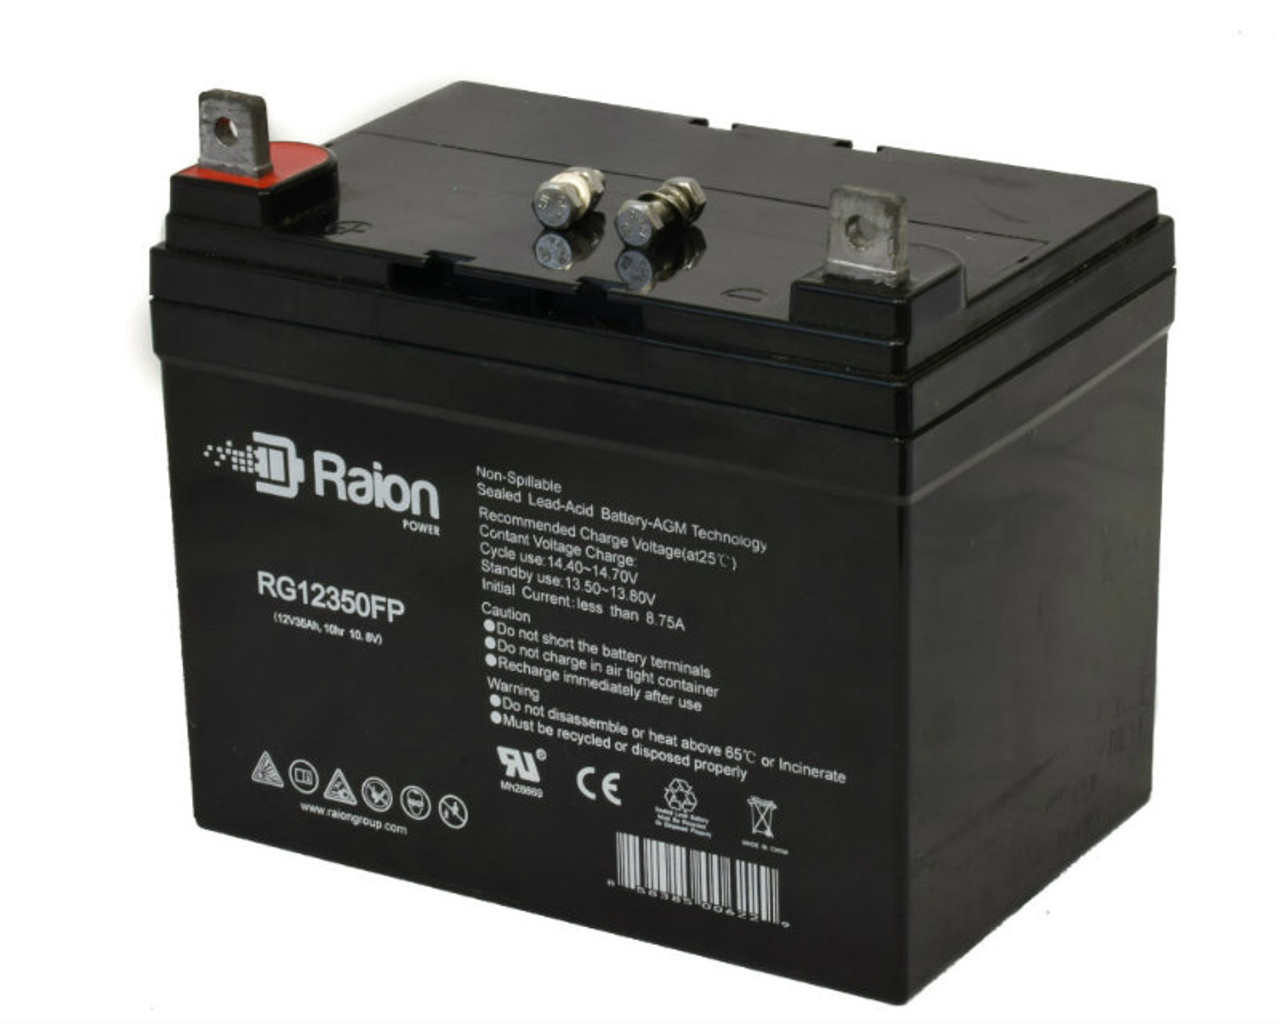 Raion Power Replacement 12V 35Ah RG12350FP Battery for Ultra Lawnmower "19HP/46"""